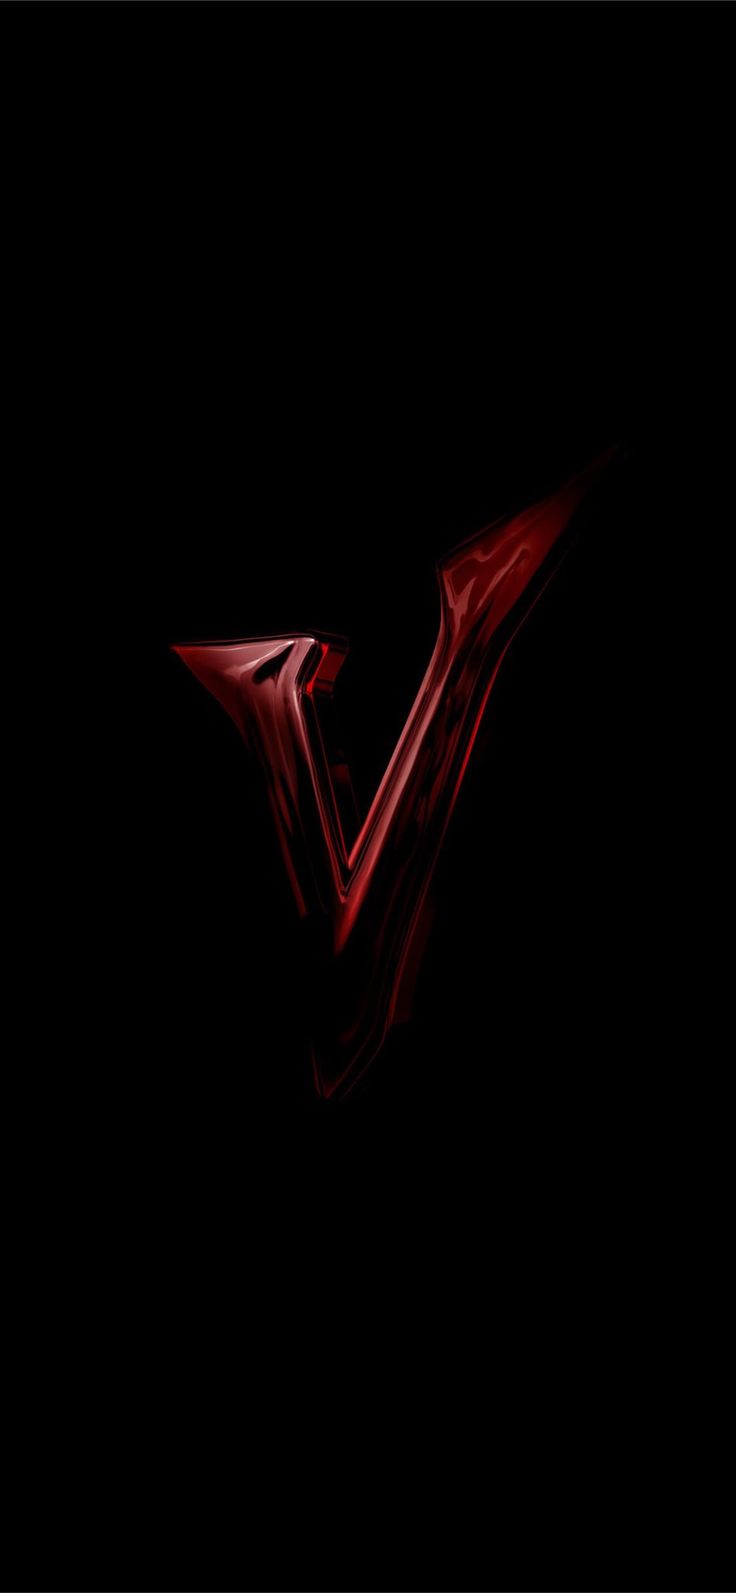 Venom 2 Let There Be Carnage Logo Wallpapers